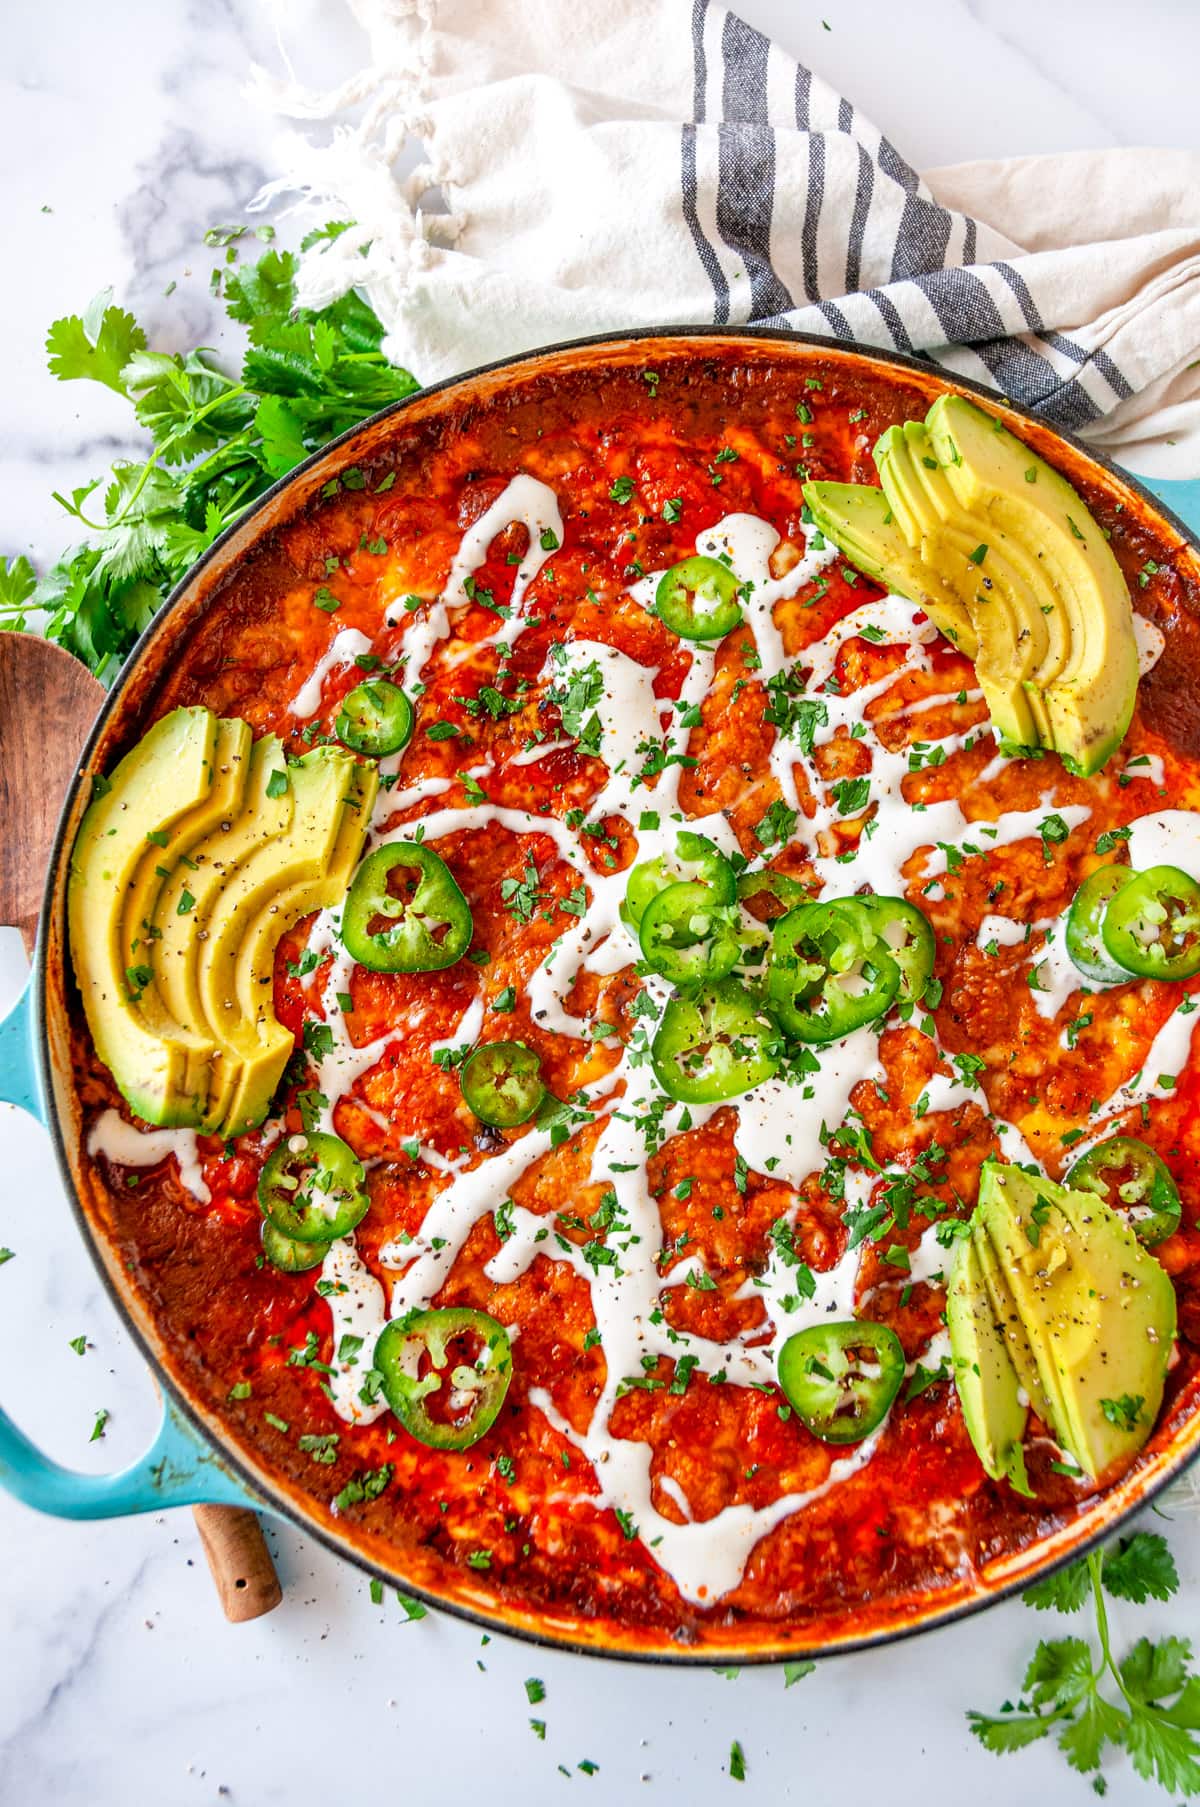 One Pot Red Enchilada Bake with sliced avocado, jalapeno, cilantro, and crema Mexicana drizzled on top